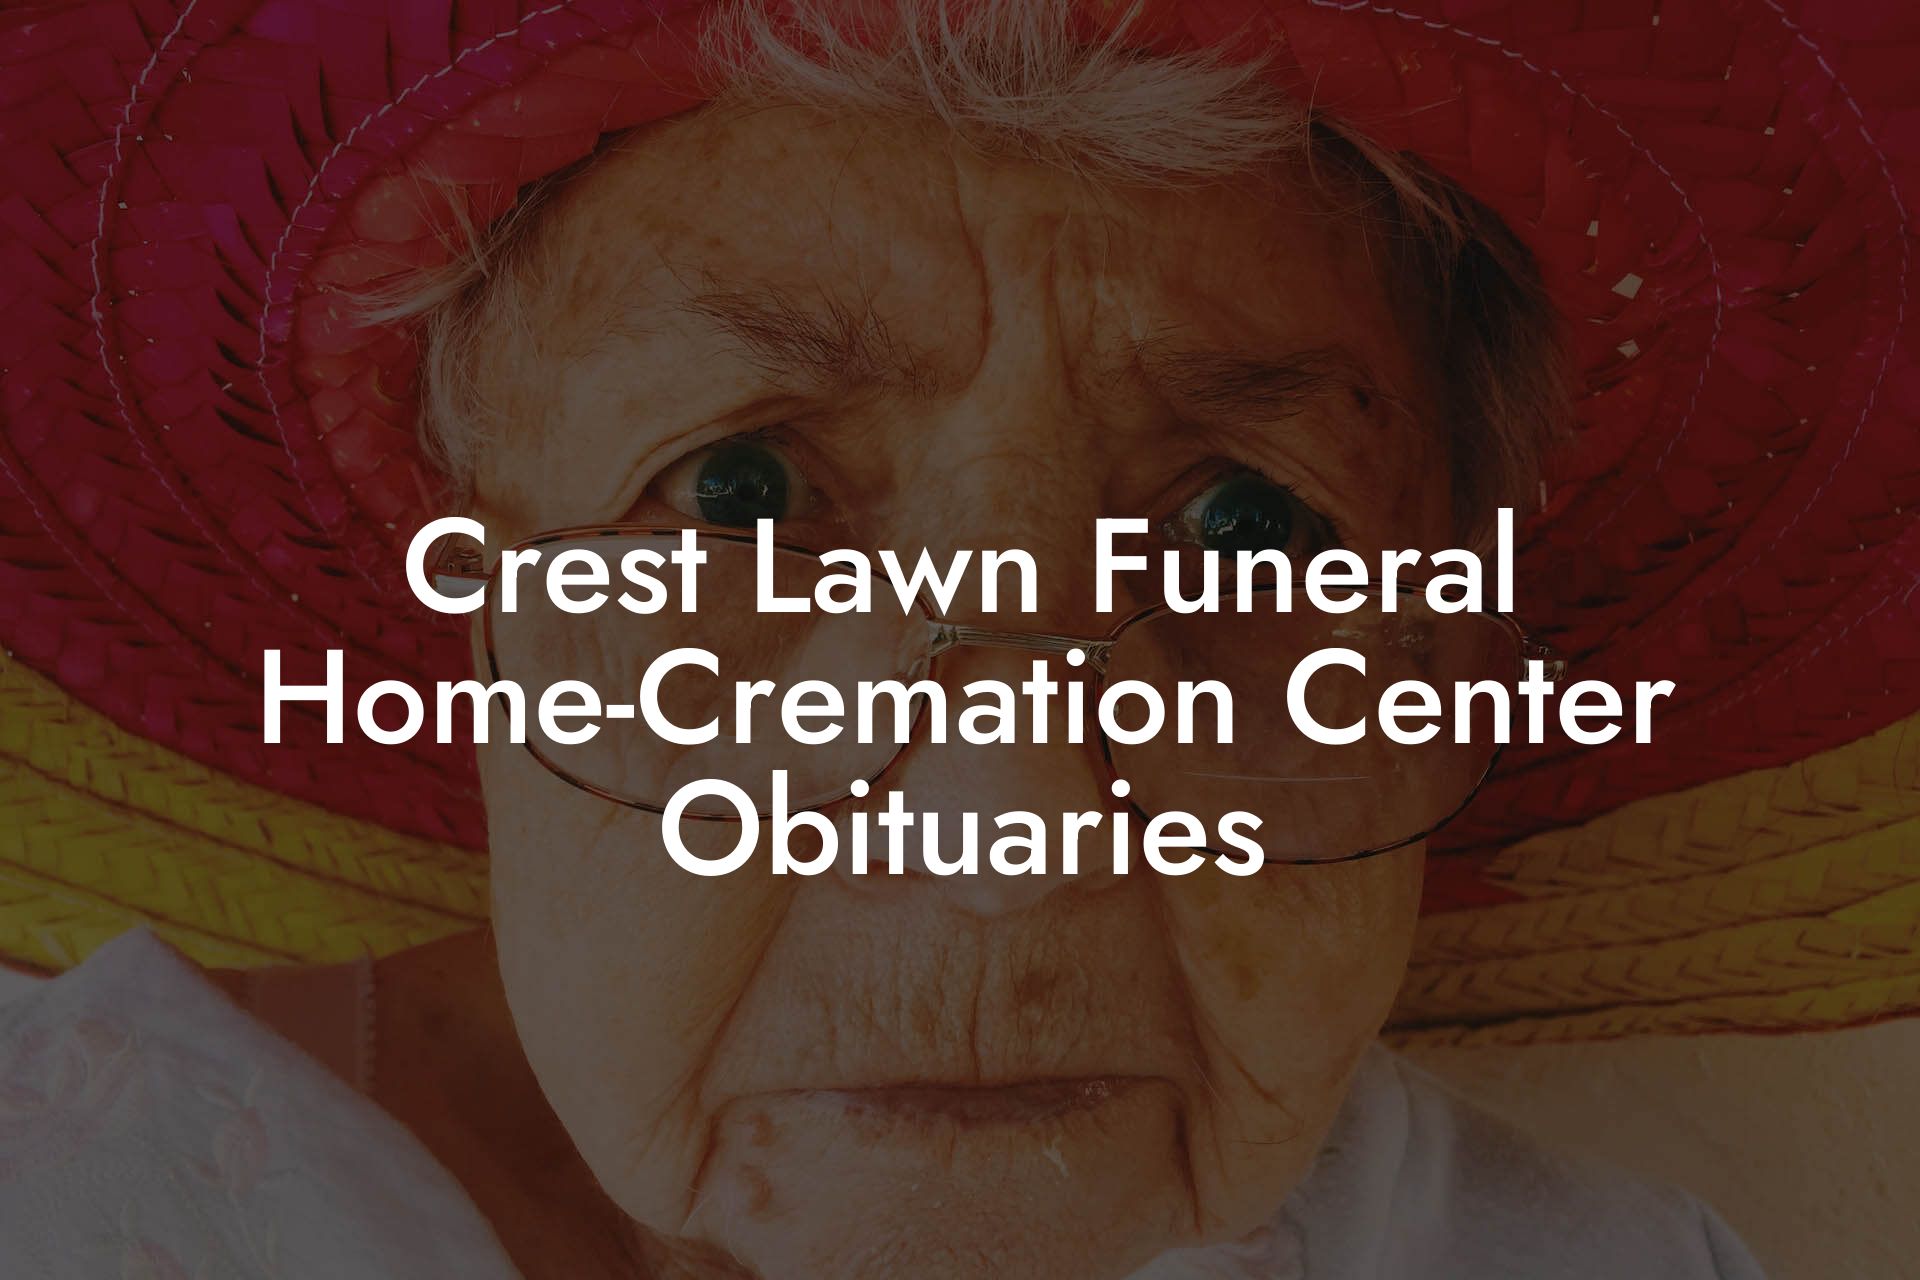 Crest Lawn Funeral Home-Cremation Center Obituaries